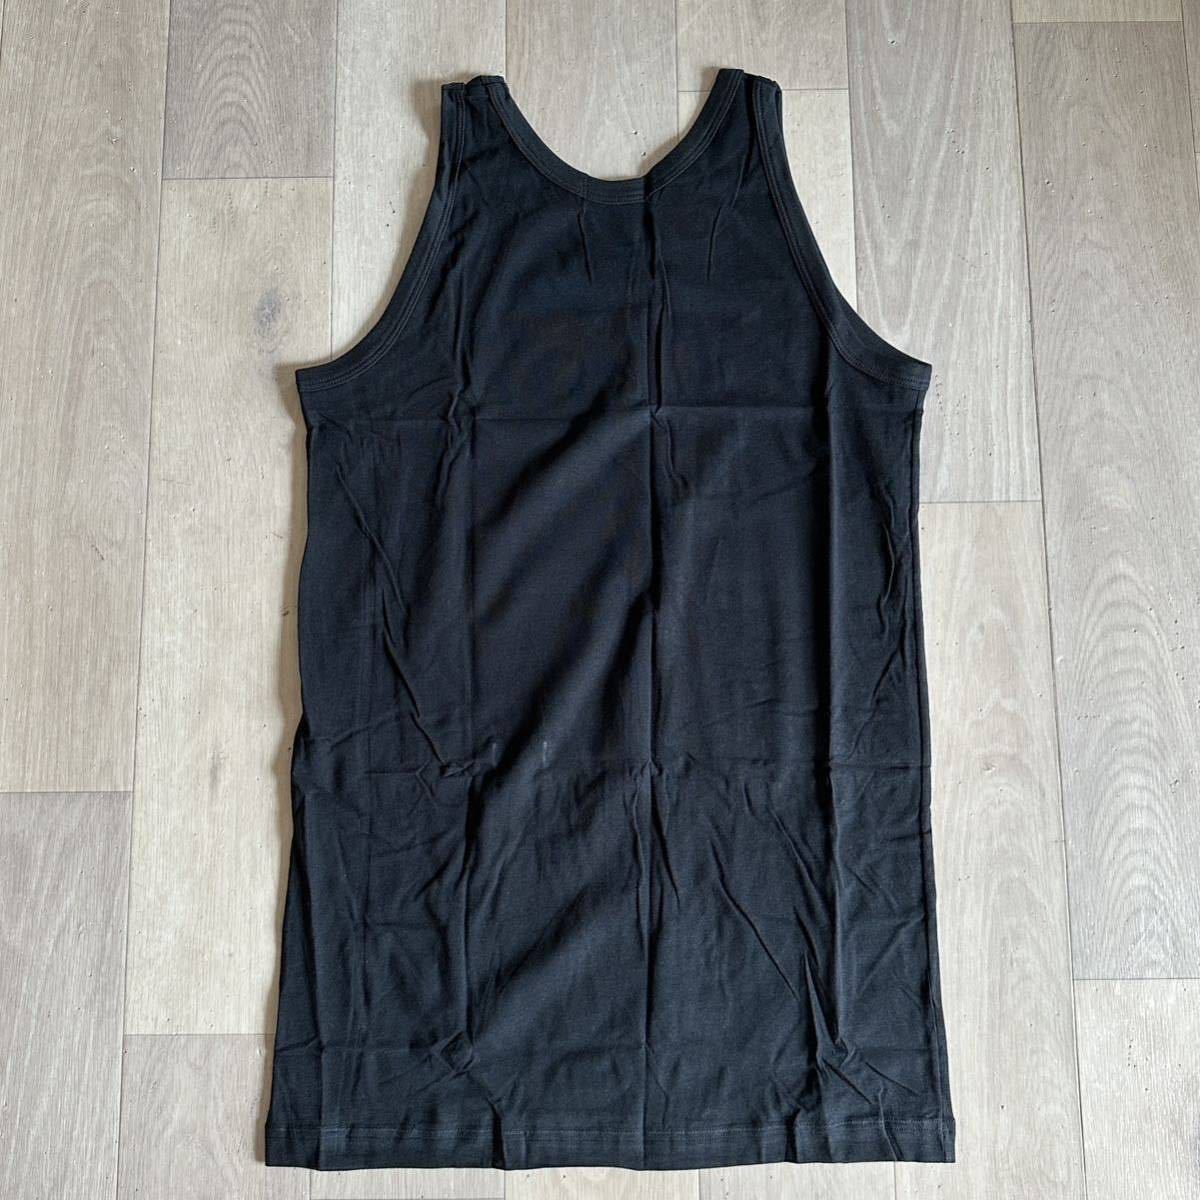 HELMUT LANG Helmut Lang 90S person himself period Tank Top new goods unused goods Dead Stock size L made in Japan 